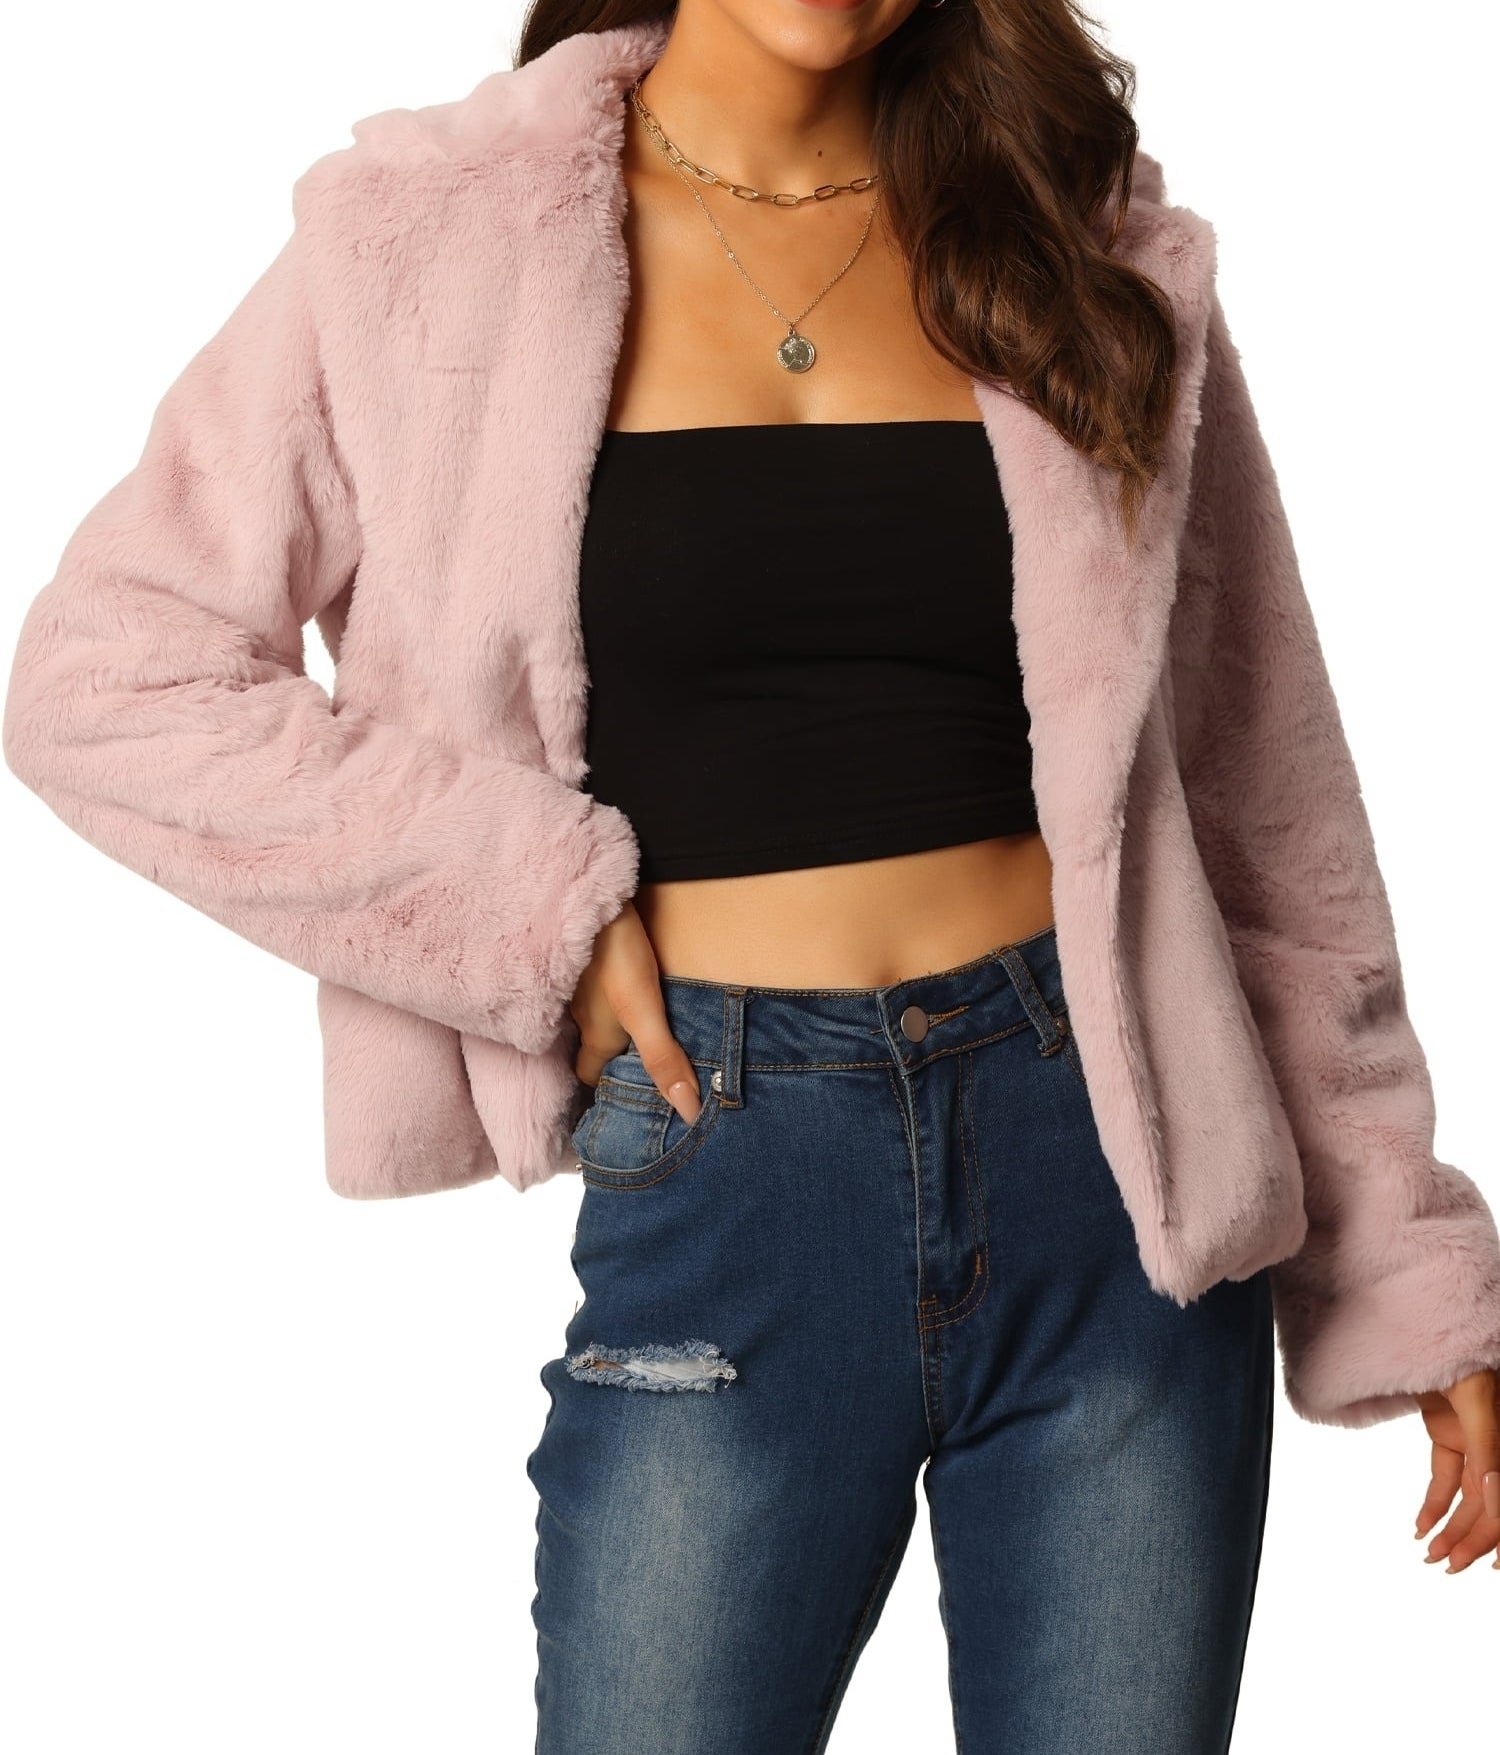 model in faux fur jacket with cropped top and ripped jeans